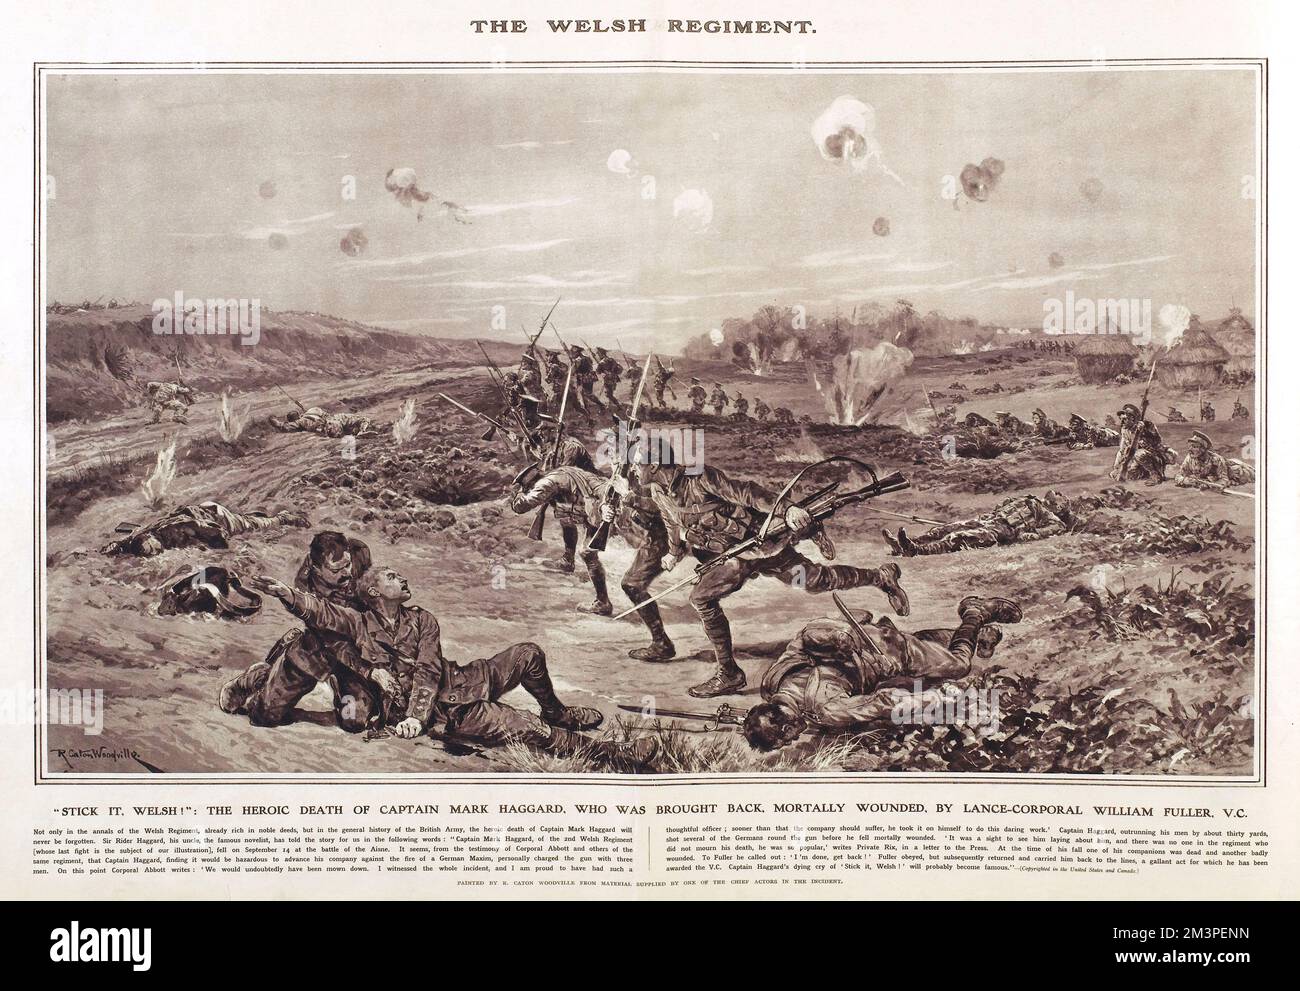 The heroic death of Captain Mark Haggard of the Welsh Regiment, who was brought back, mortally wounded, by Lance-Corporal William Fuller, VC.  Reproduction of a painting by R Caton Woodville in Great War Deeds, a special panorama supplement produced by the Illustrated London News in 1915, featuring heroic actions of the First World War.      Date: 1915 Stock Photo